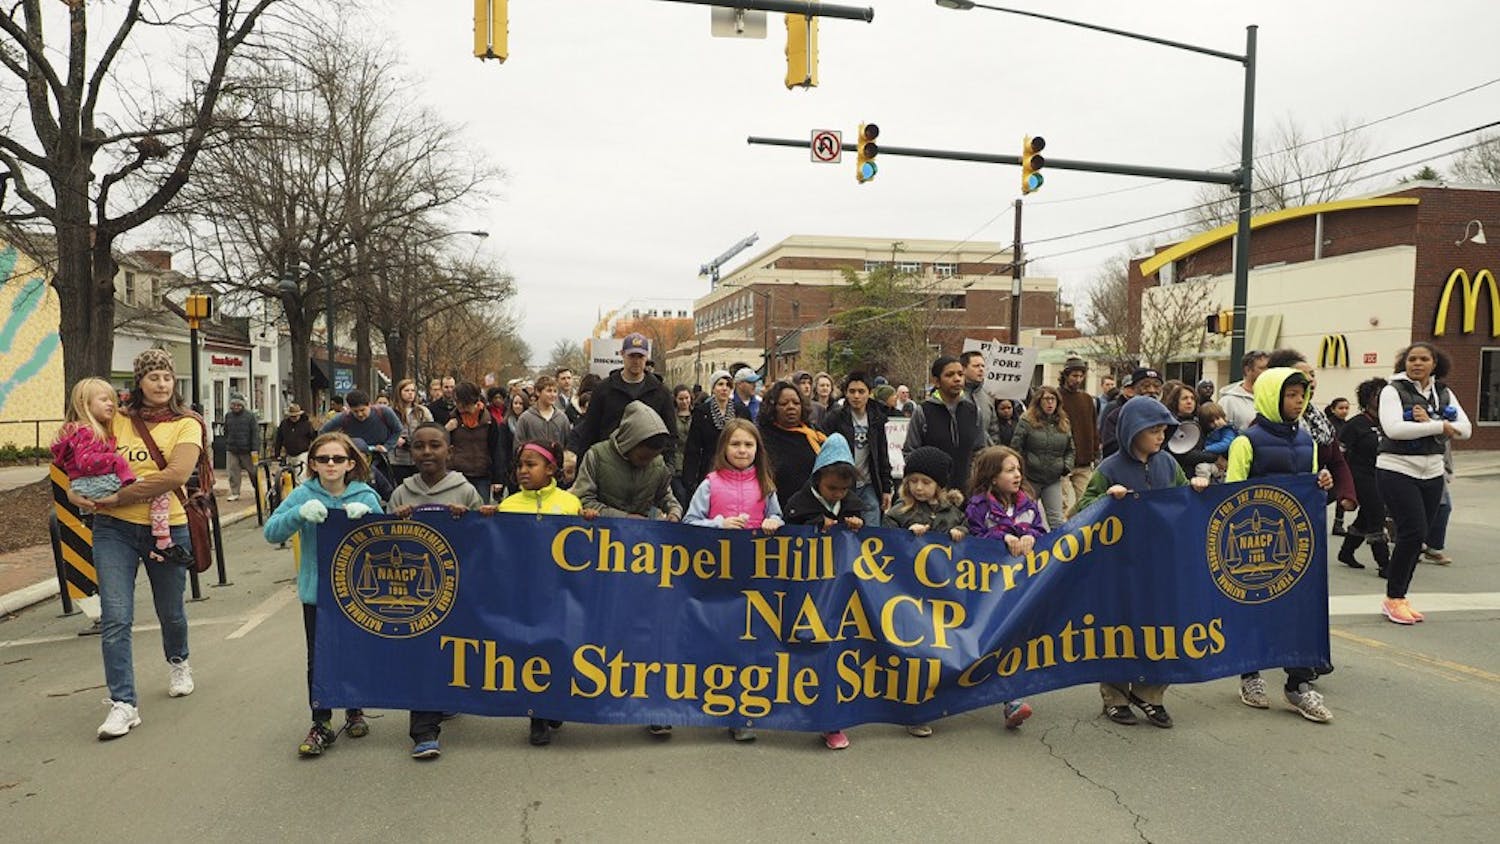 Local Chapel Hill/Carrboro youth lead the march from Peace and Justice Plaza to First Baptist Church during Monday's MLK Jr Day Celebration.